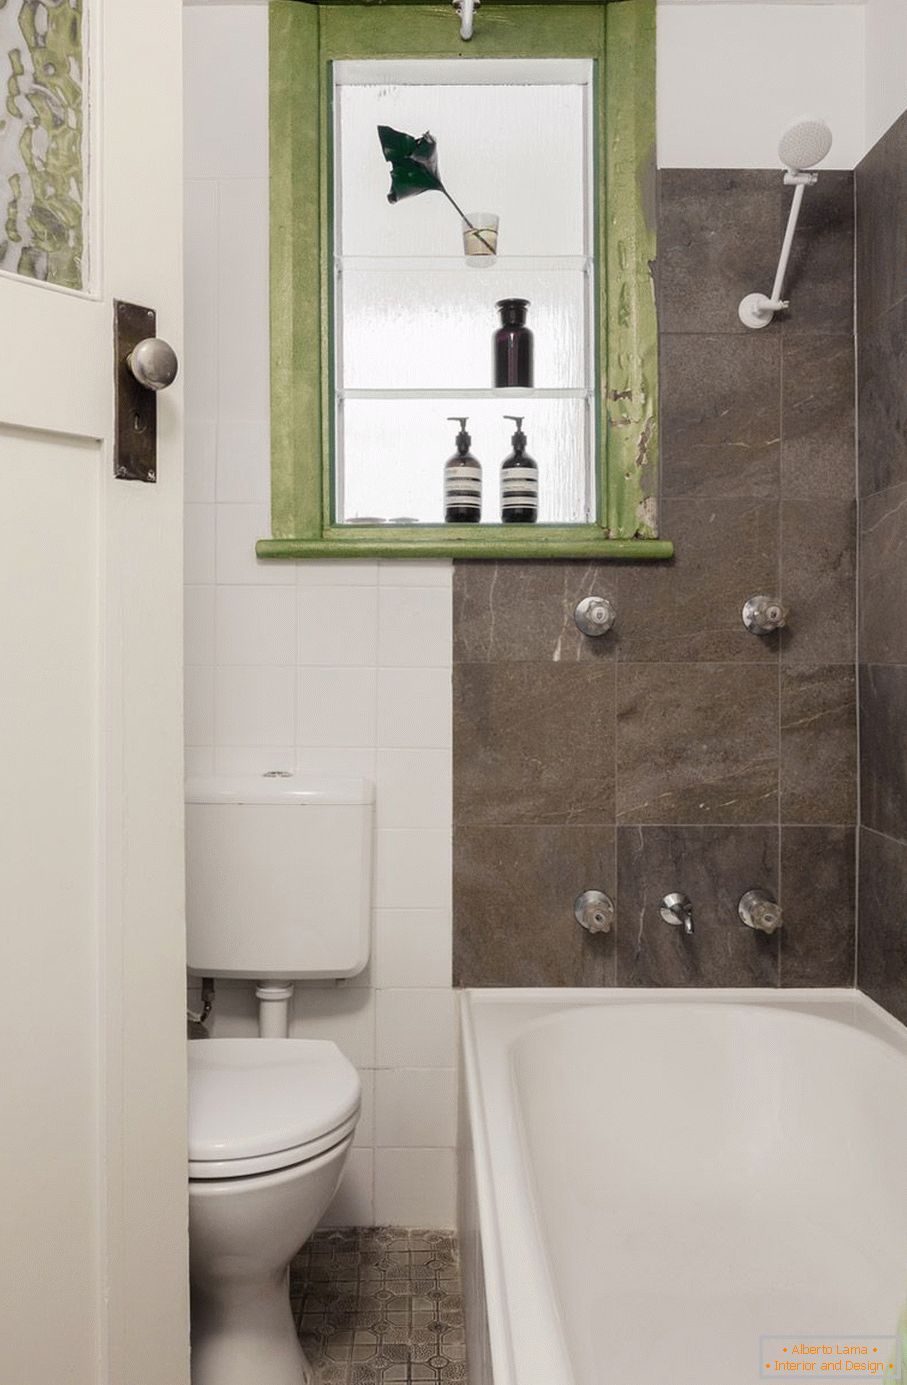 Green accents in a black and white bathroom